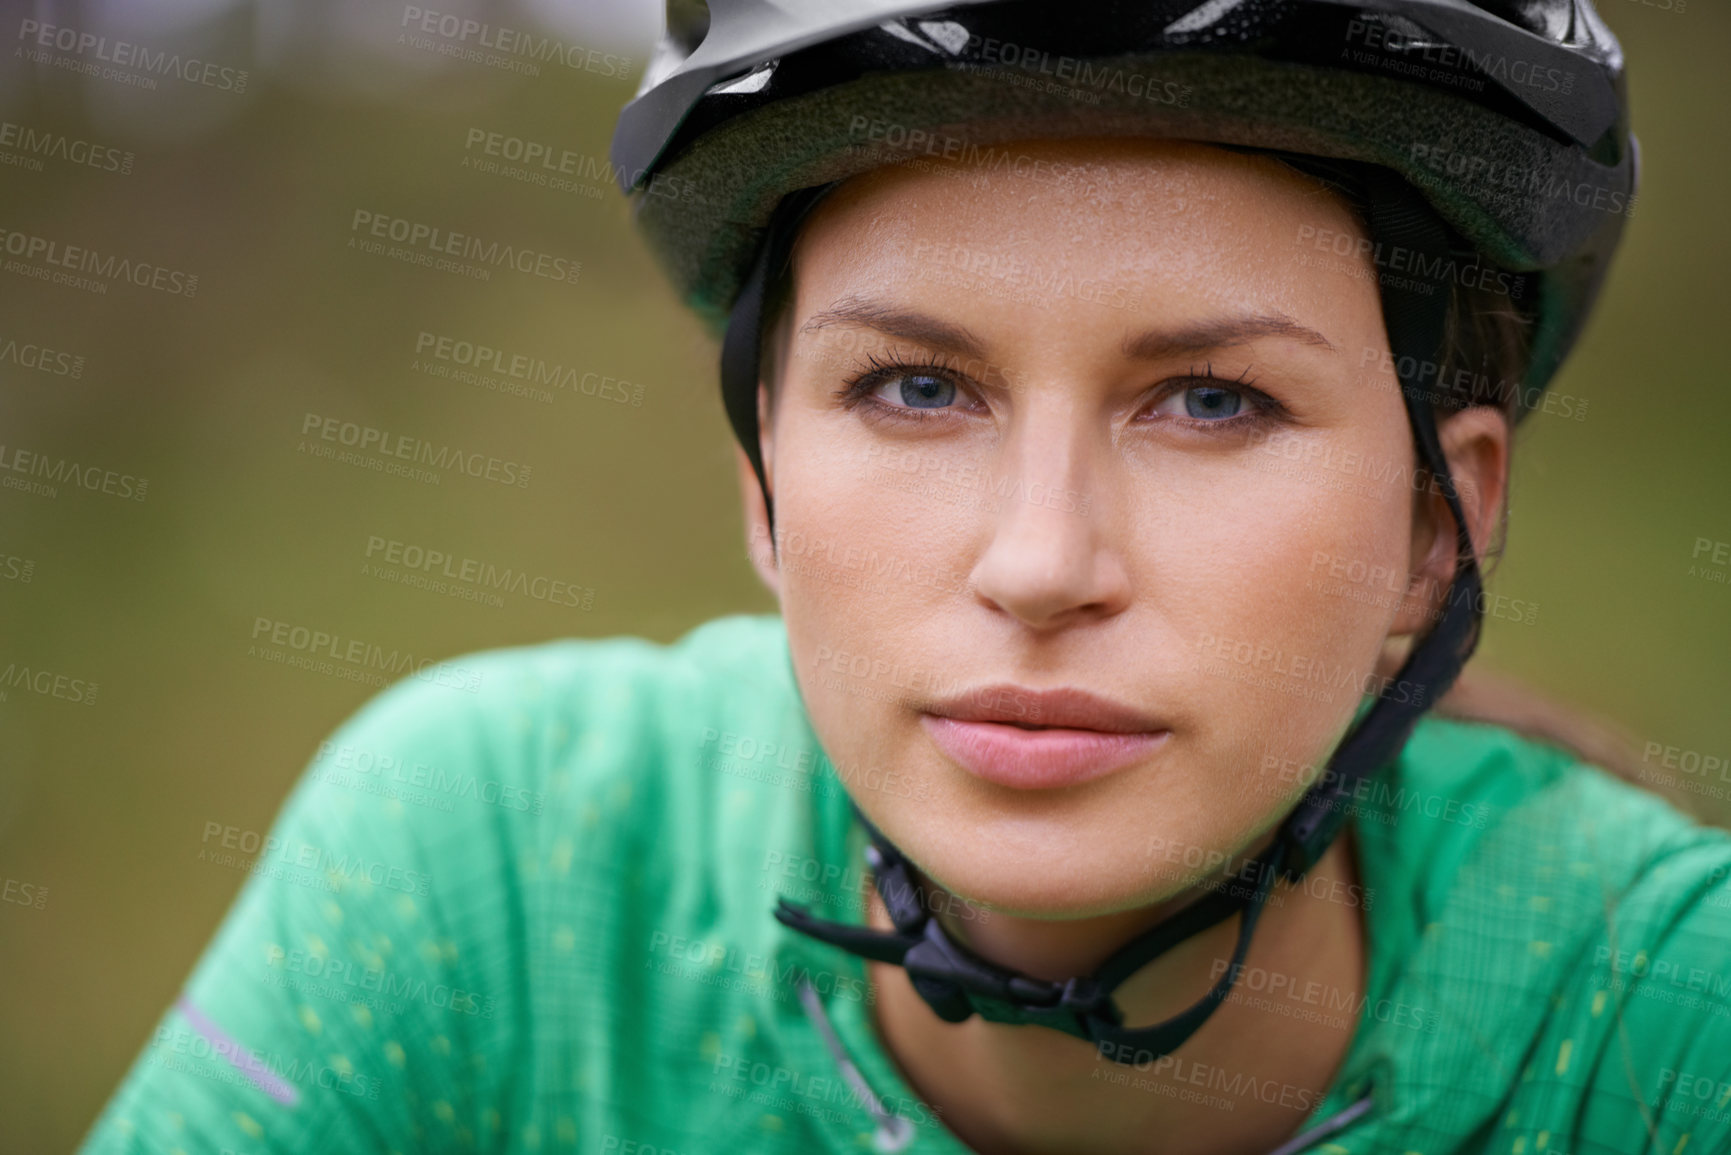 Buy stock photo Portrait, cycling and helmet with woman closeup in nature for fitness, training or off road hobby. Face, exercise and health with confident young athlete or cyclist outdoor in countryside for cardio